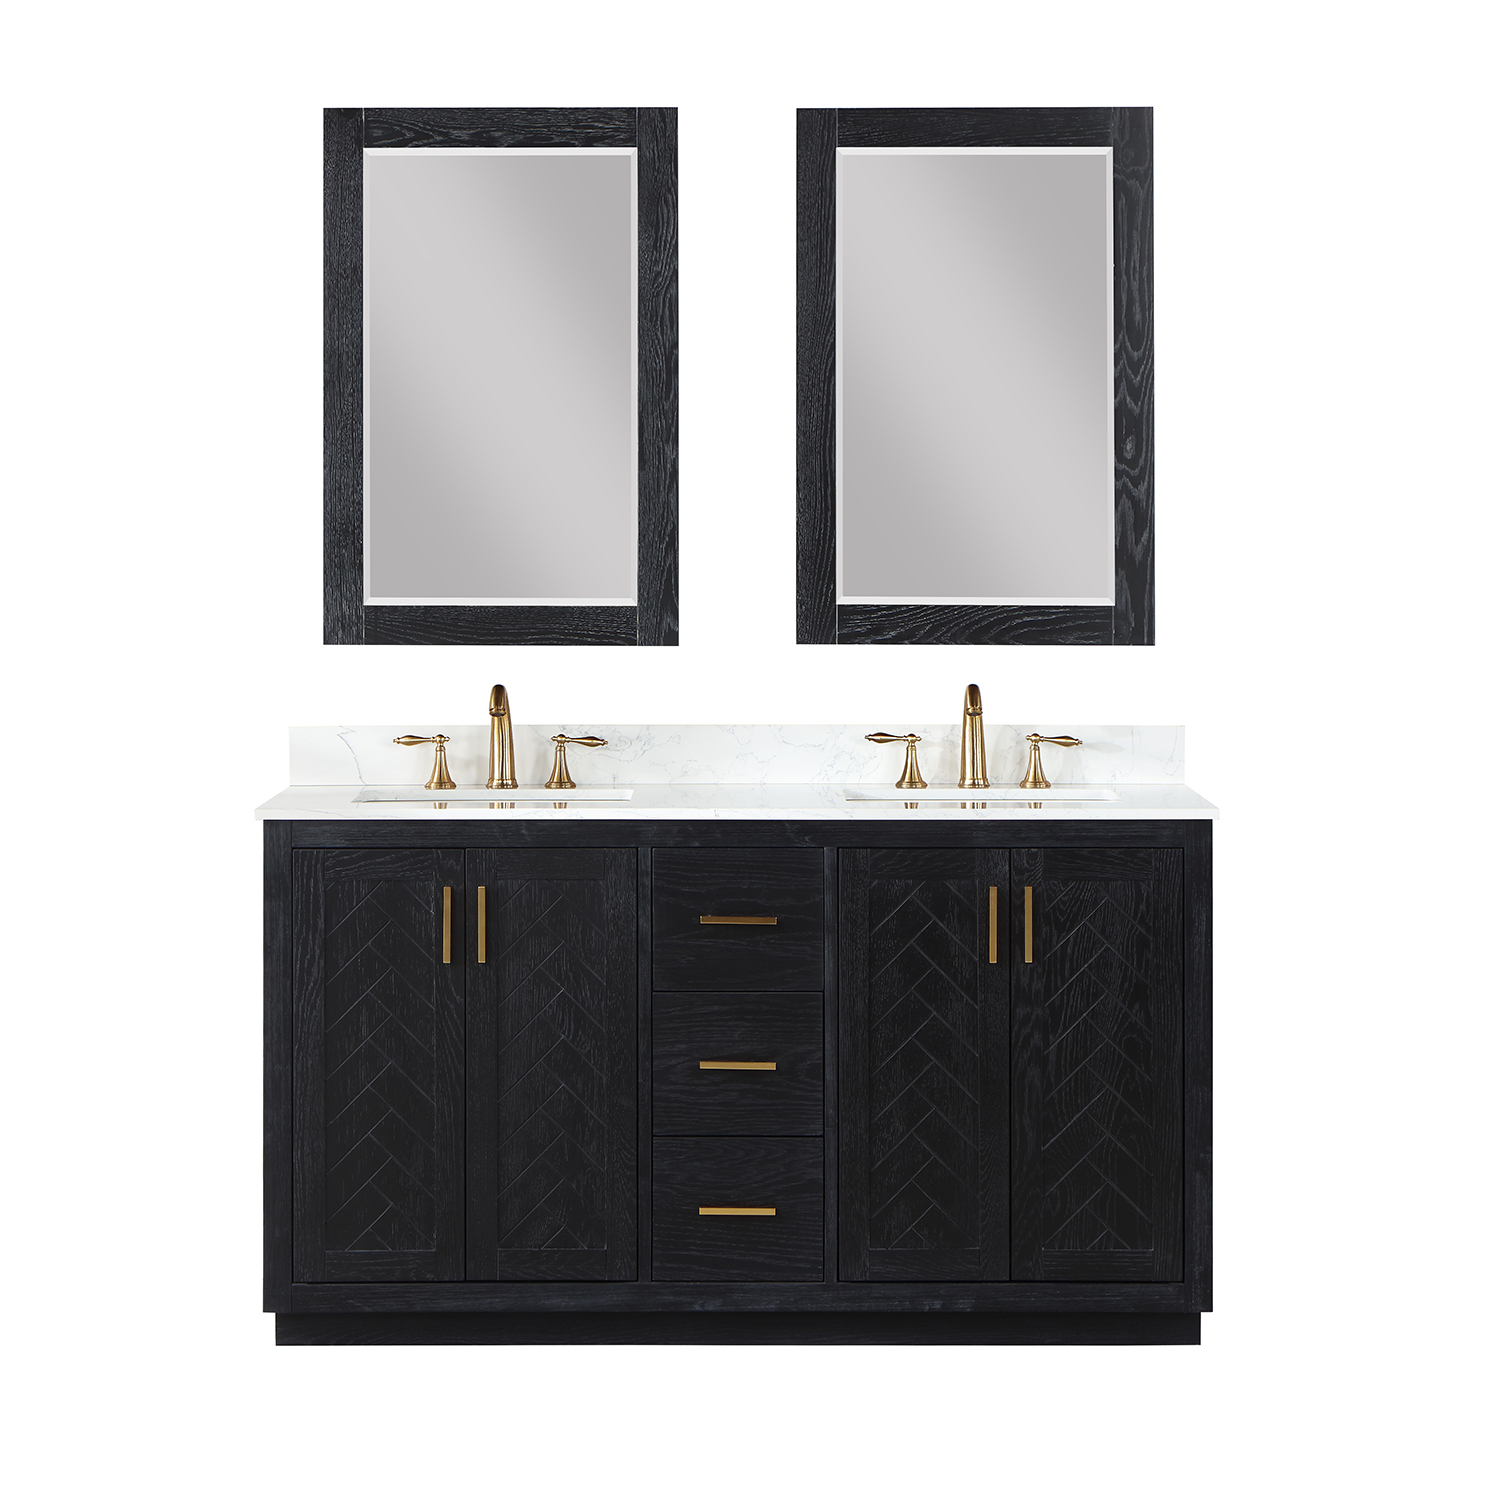 Issac Edwards Collection 60" Double Bathroom Vanity Set in Black Oak with Grain White Composite Stone Countertop without Mirror 